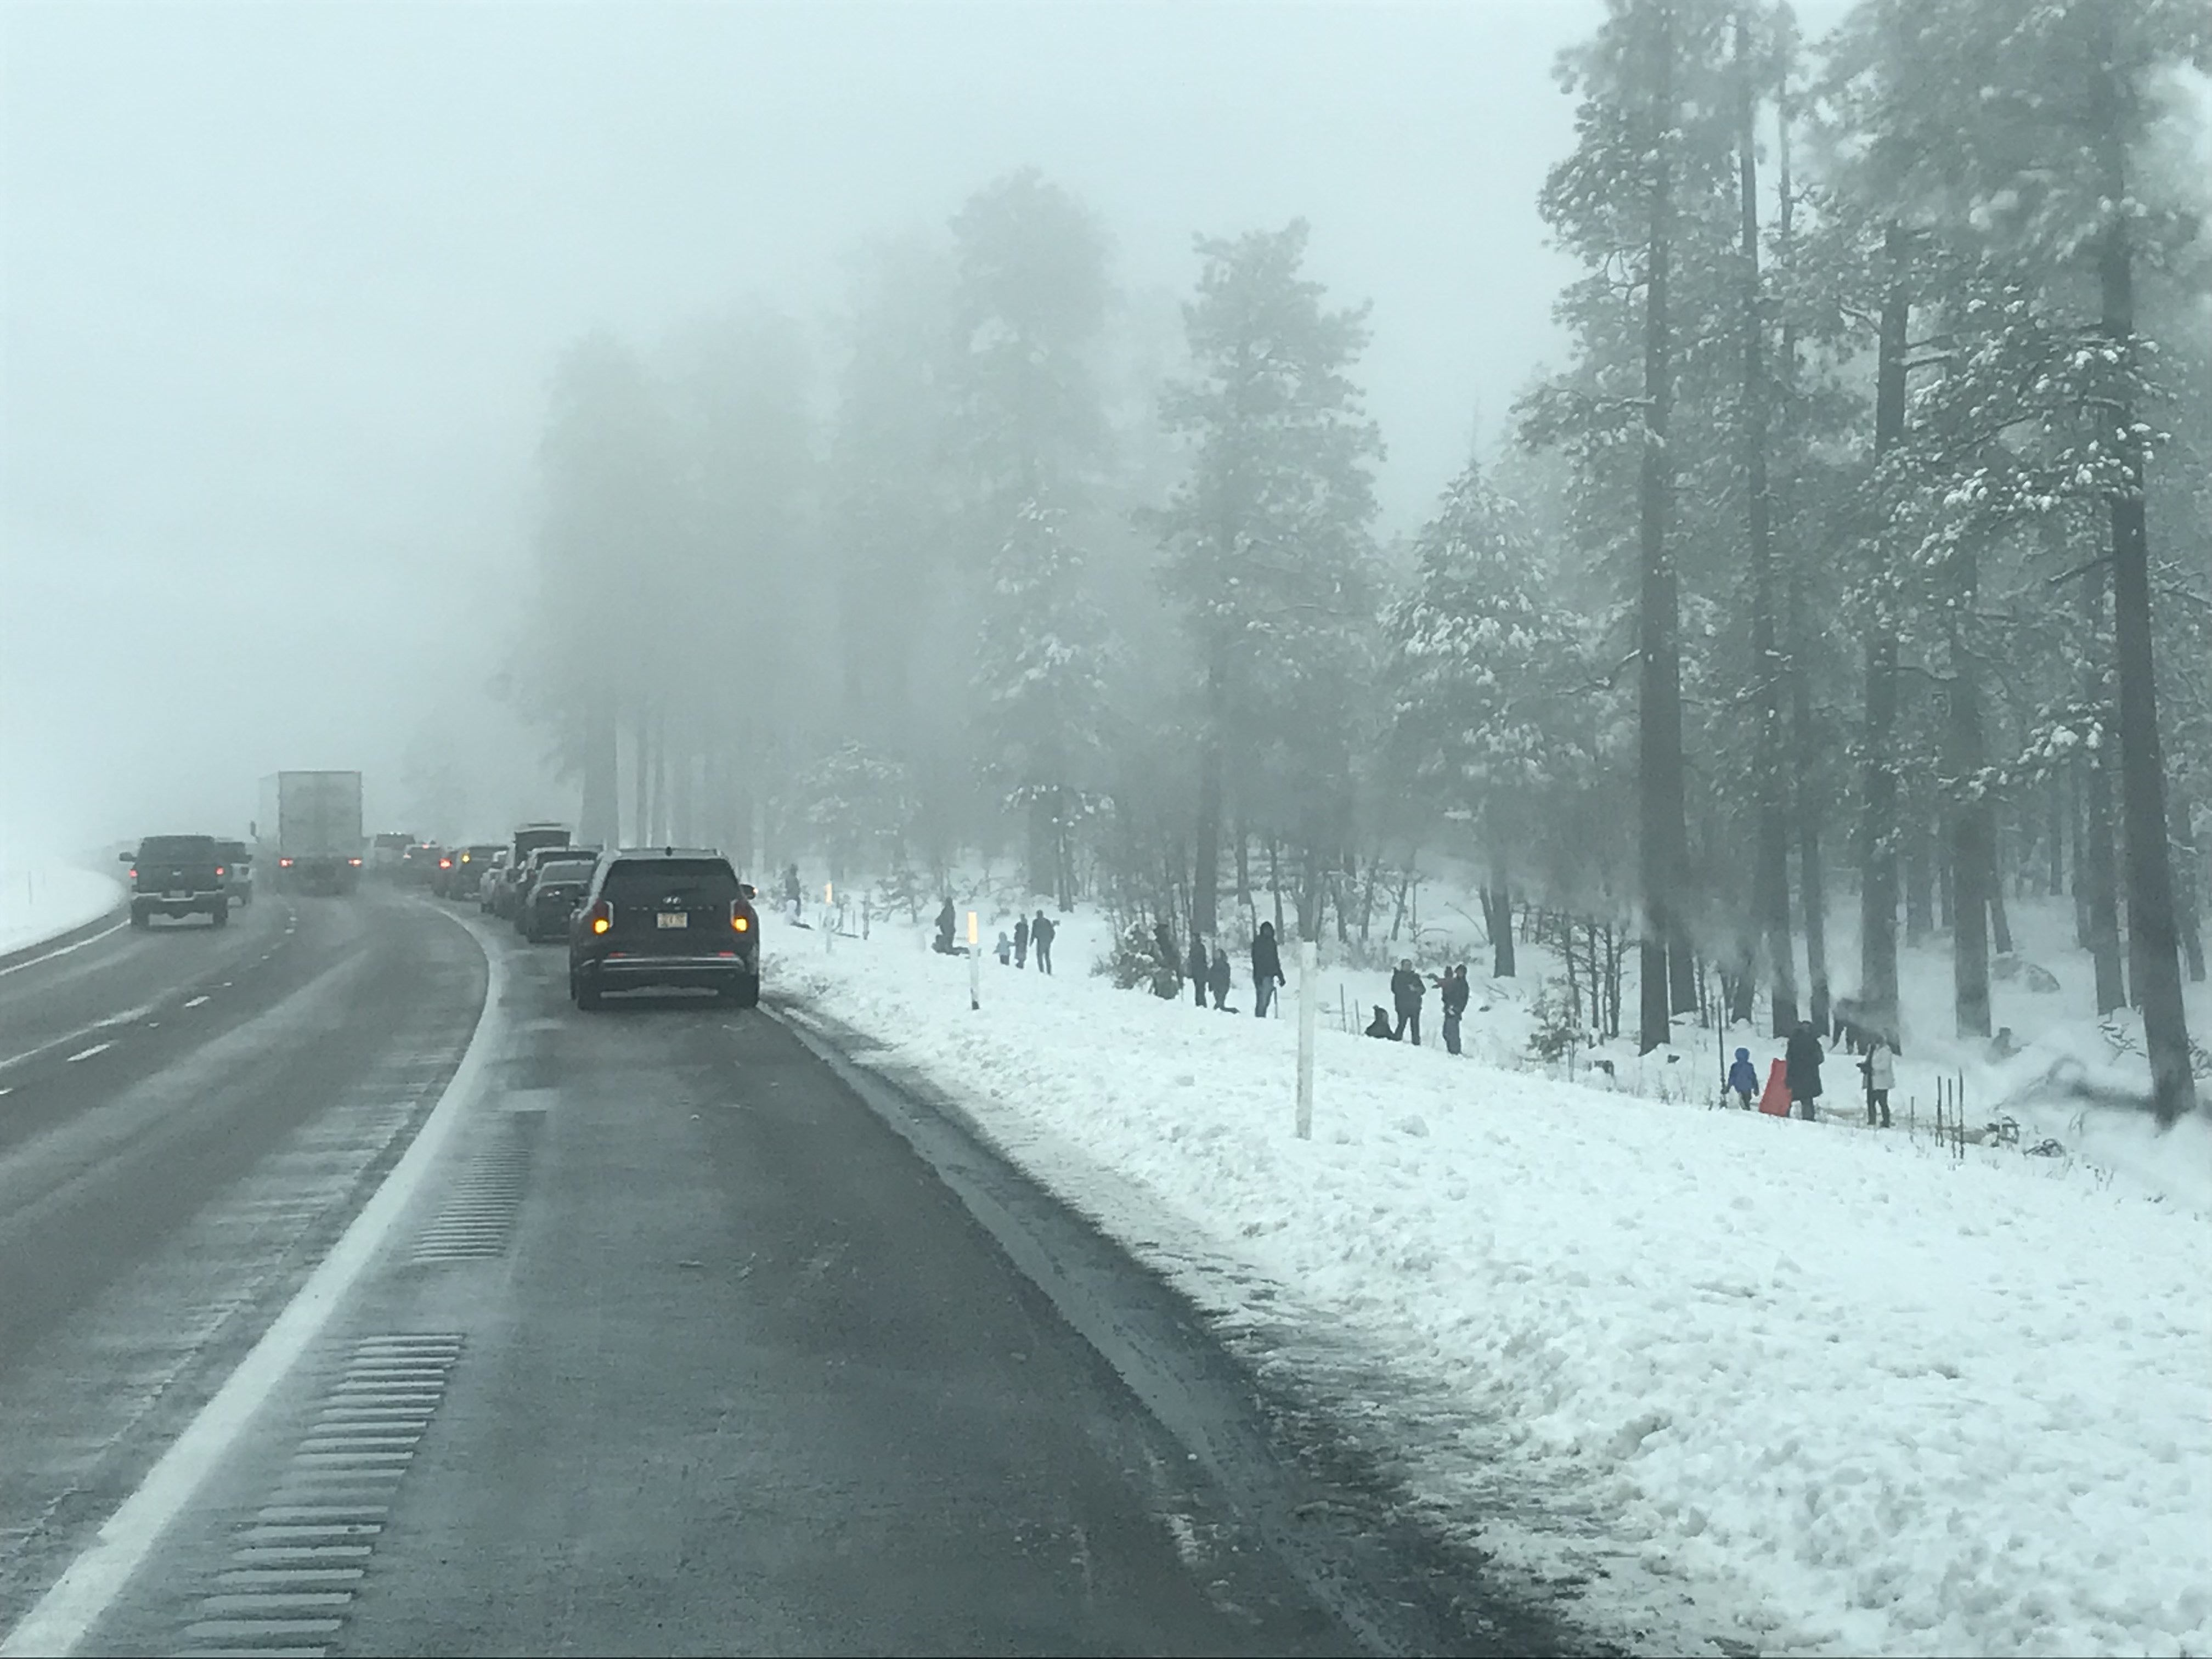 People playing in the snow along a highway shoulder